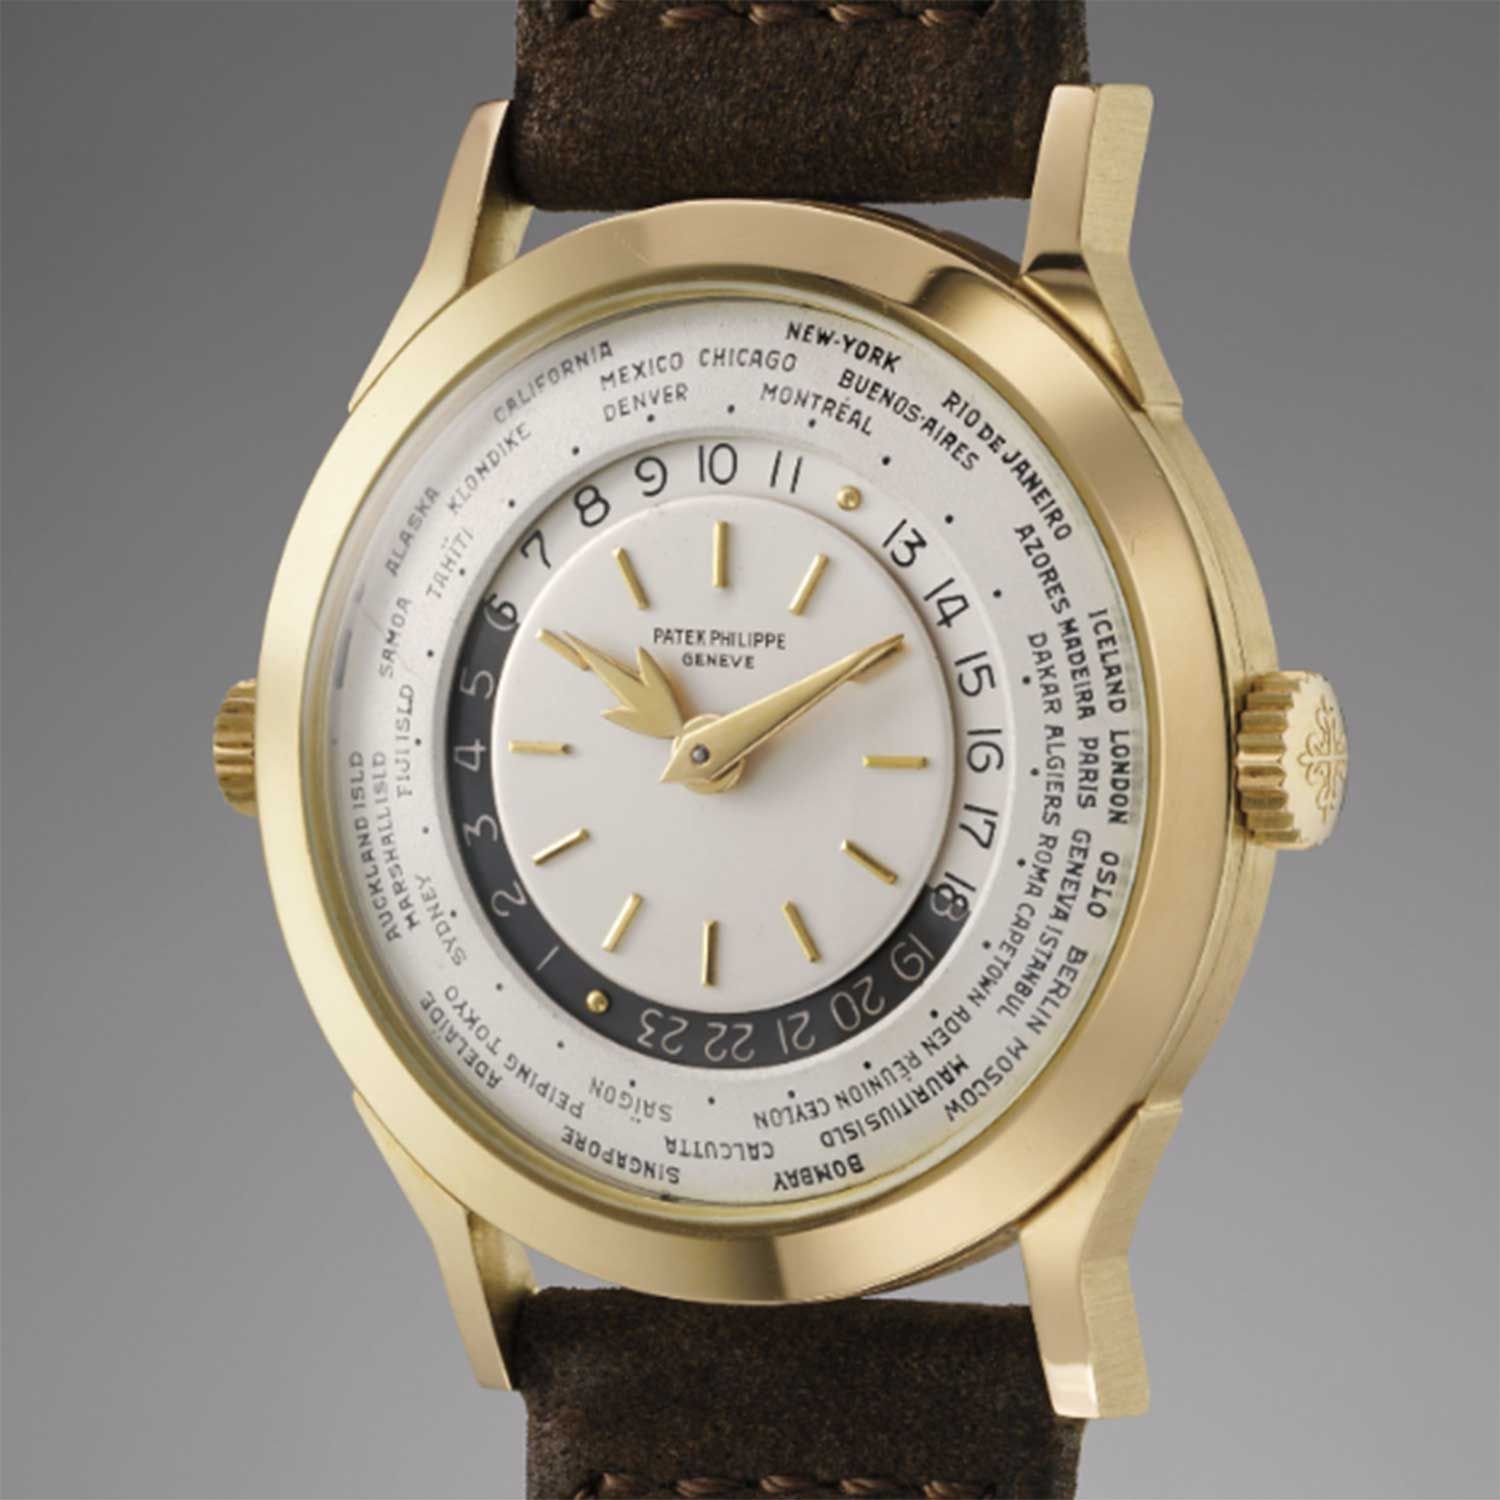 In 1962, Patek Philippe modified the 2523 into the 2523-1 (Image: Phillips)